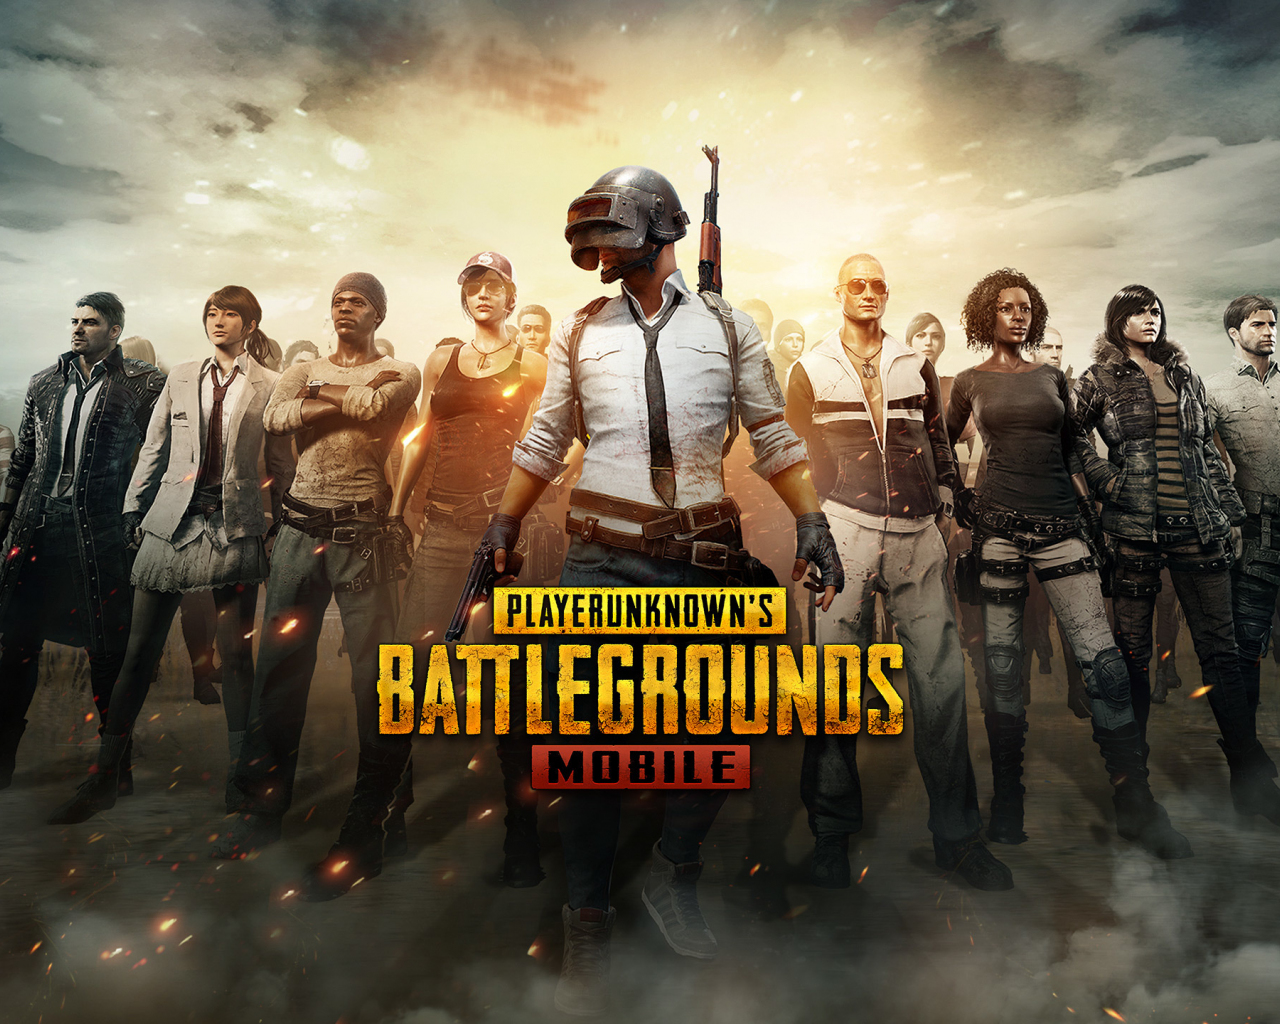 Download wallpaper 1280x1024 pubg mobile, android game, characters,  standard 5:4 fullscreen wallpaper, 1280x1024 hd background, 16108